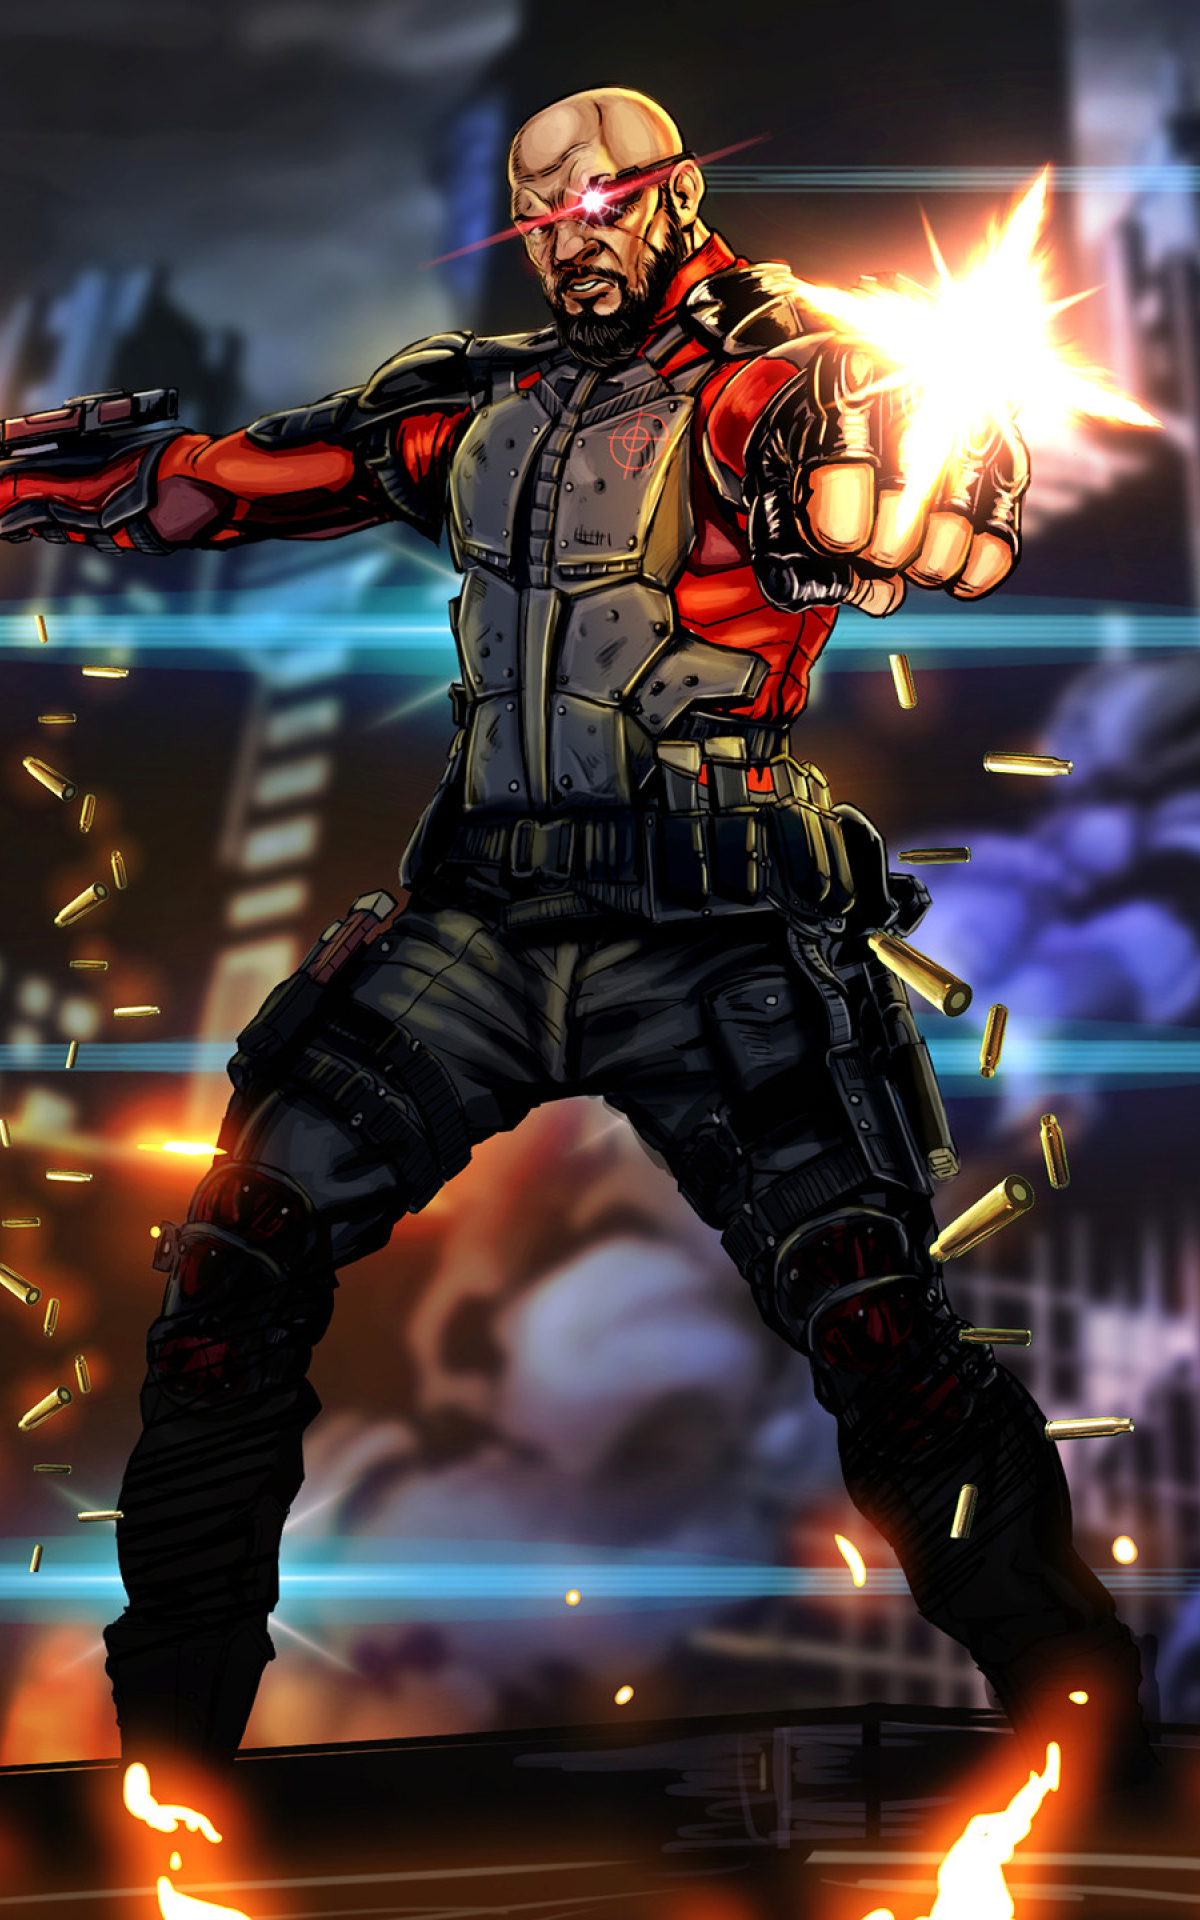 Deadshot wallpaper by ROCKYVV  Download on ZEDGE  e60a